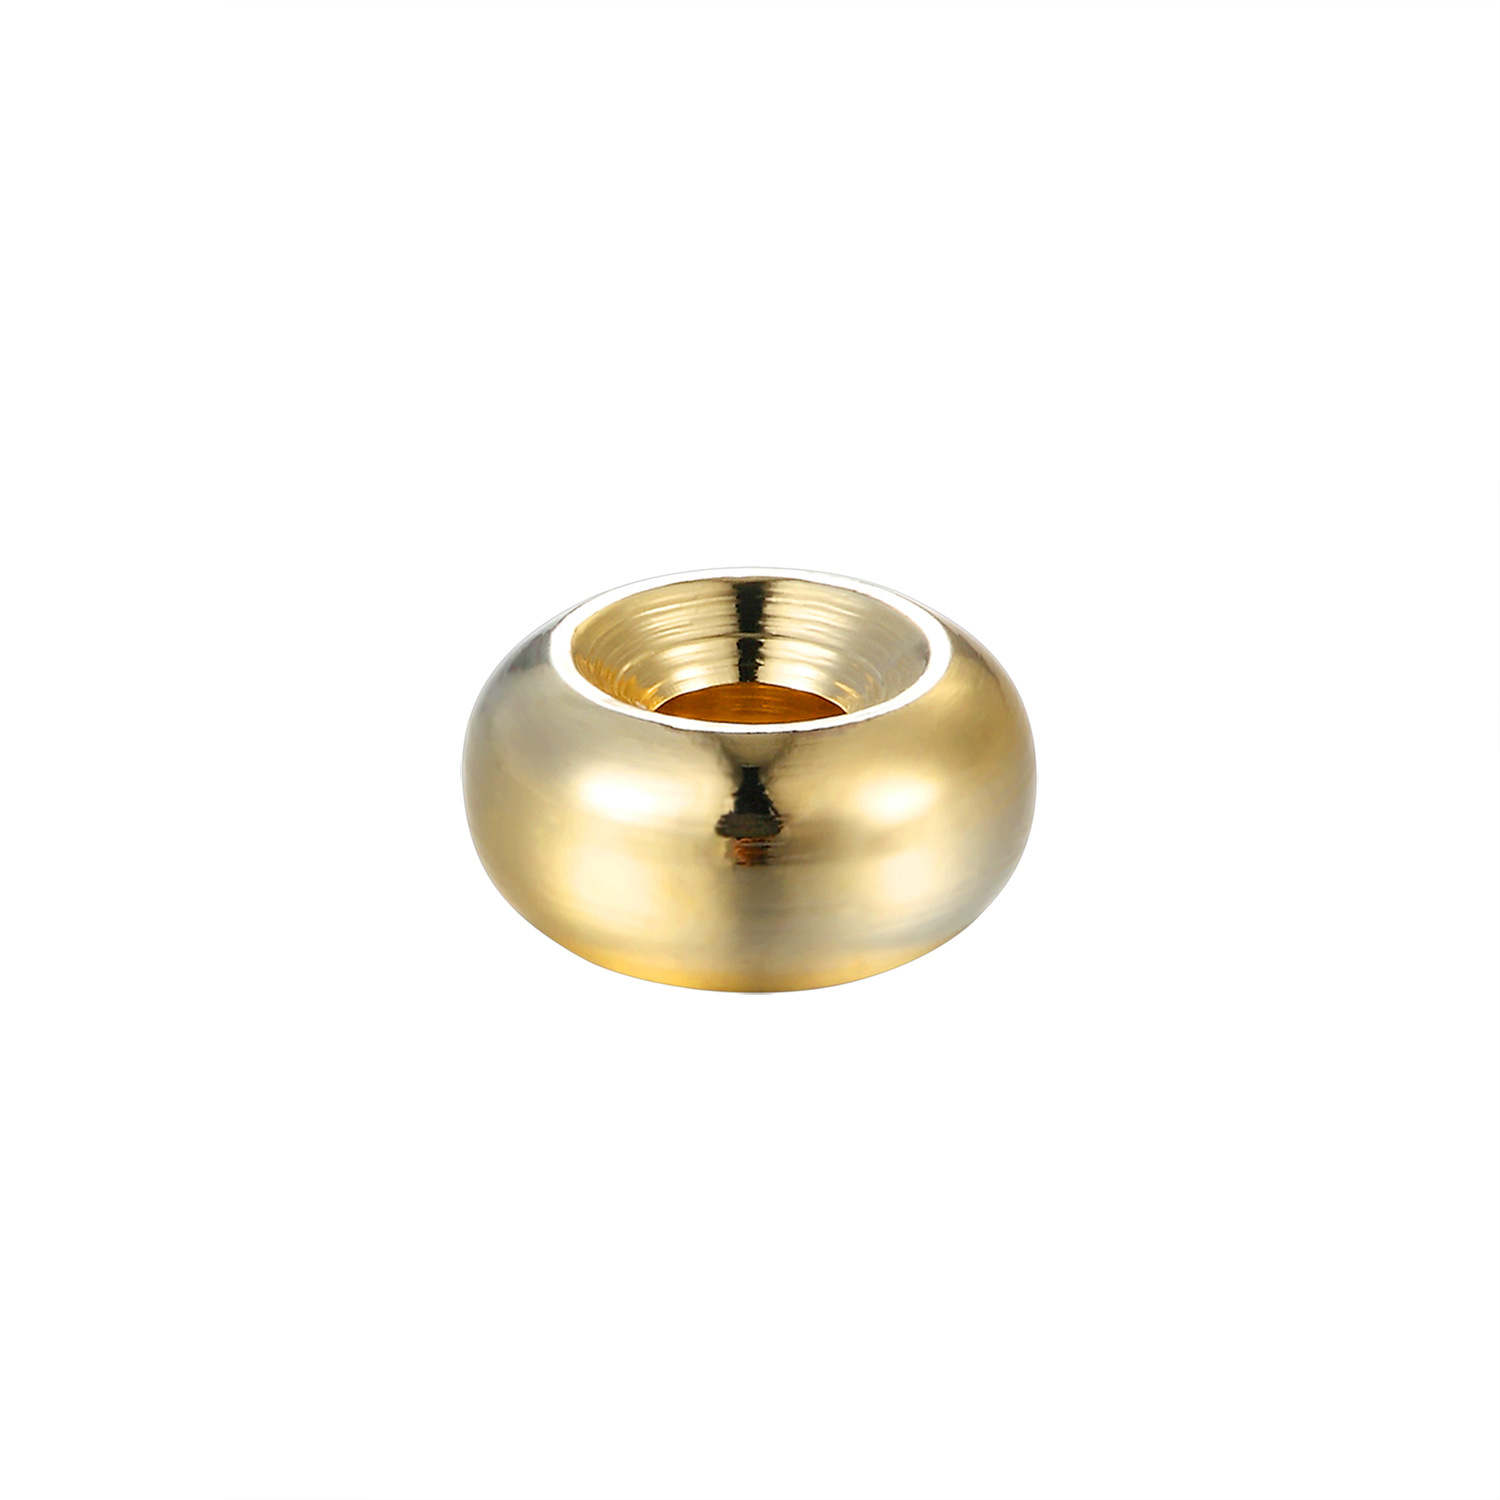 A real gold plated 4MM